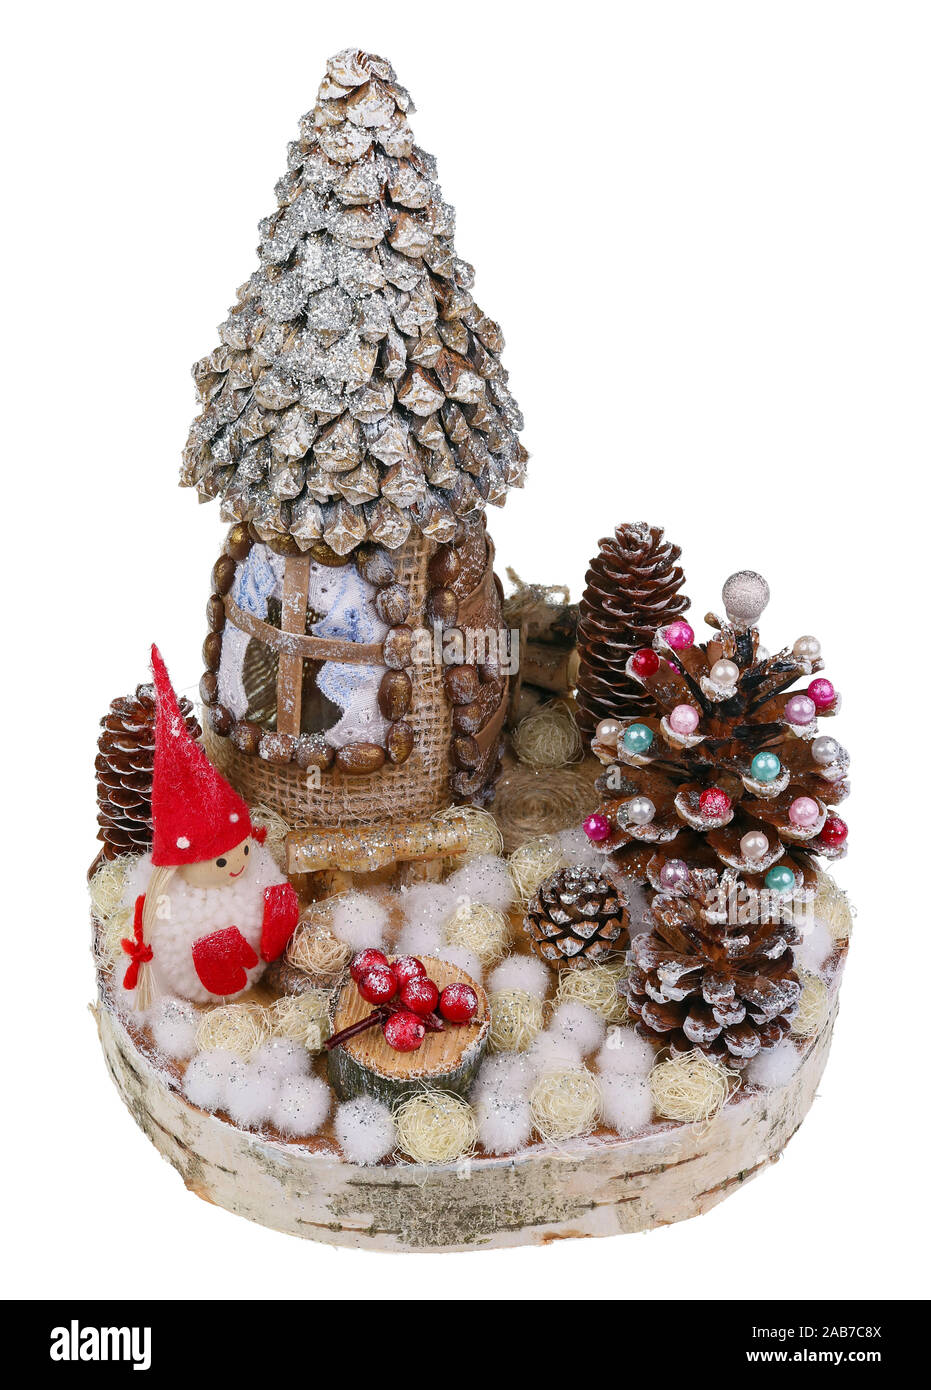 Christmas homemade  house and forest with a little gnome dwarf made of natural materials - cones, sticks, wood. Isolated on white macro Stock Photo